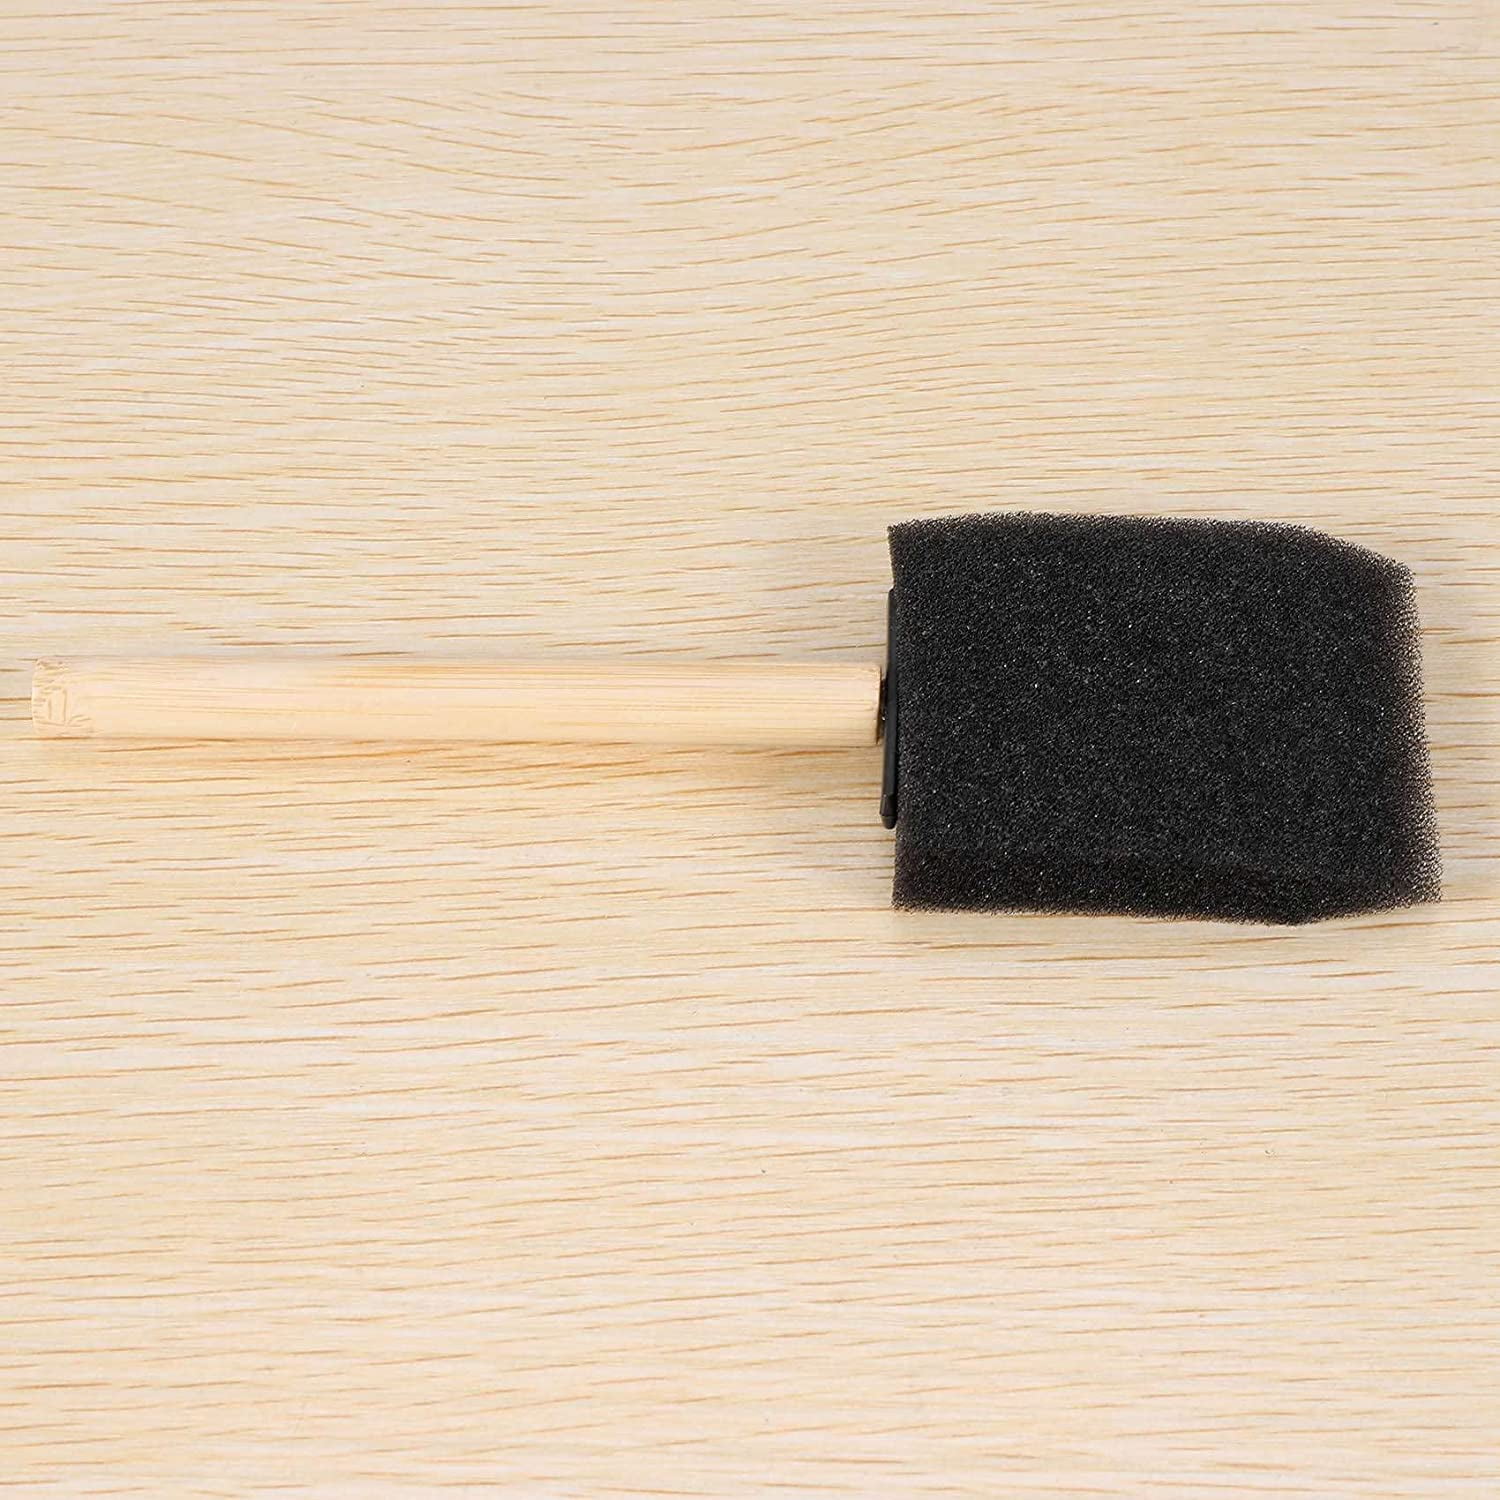 2 Inch Foam Sponge Brush with Wooden Handle (40 Pack!)